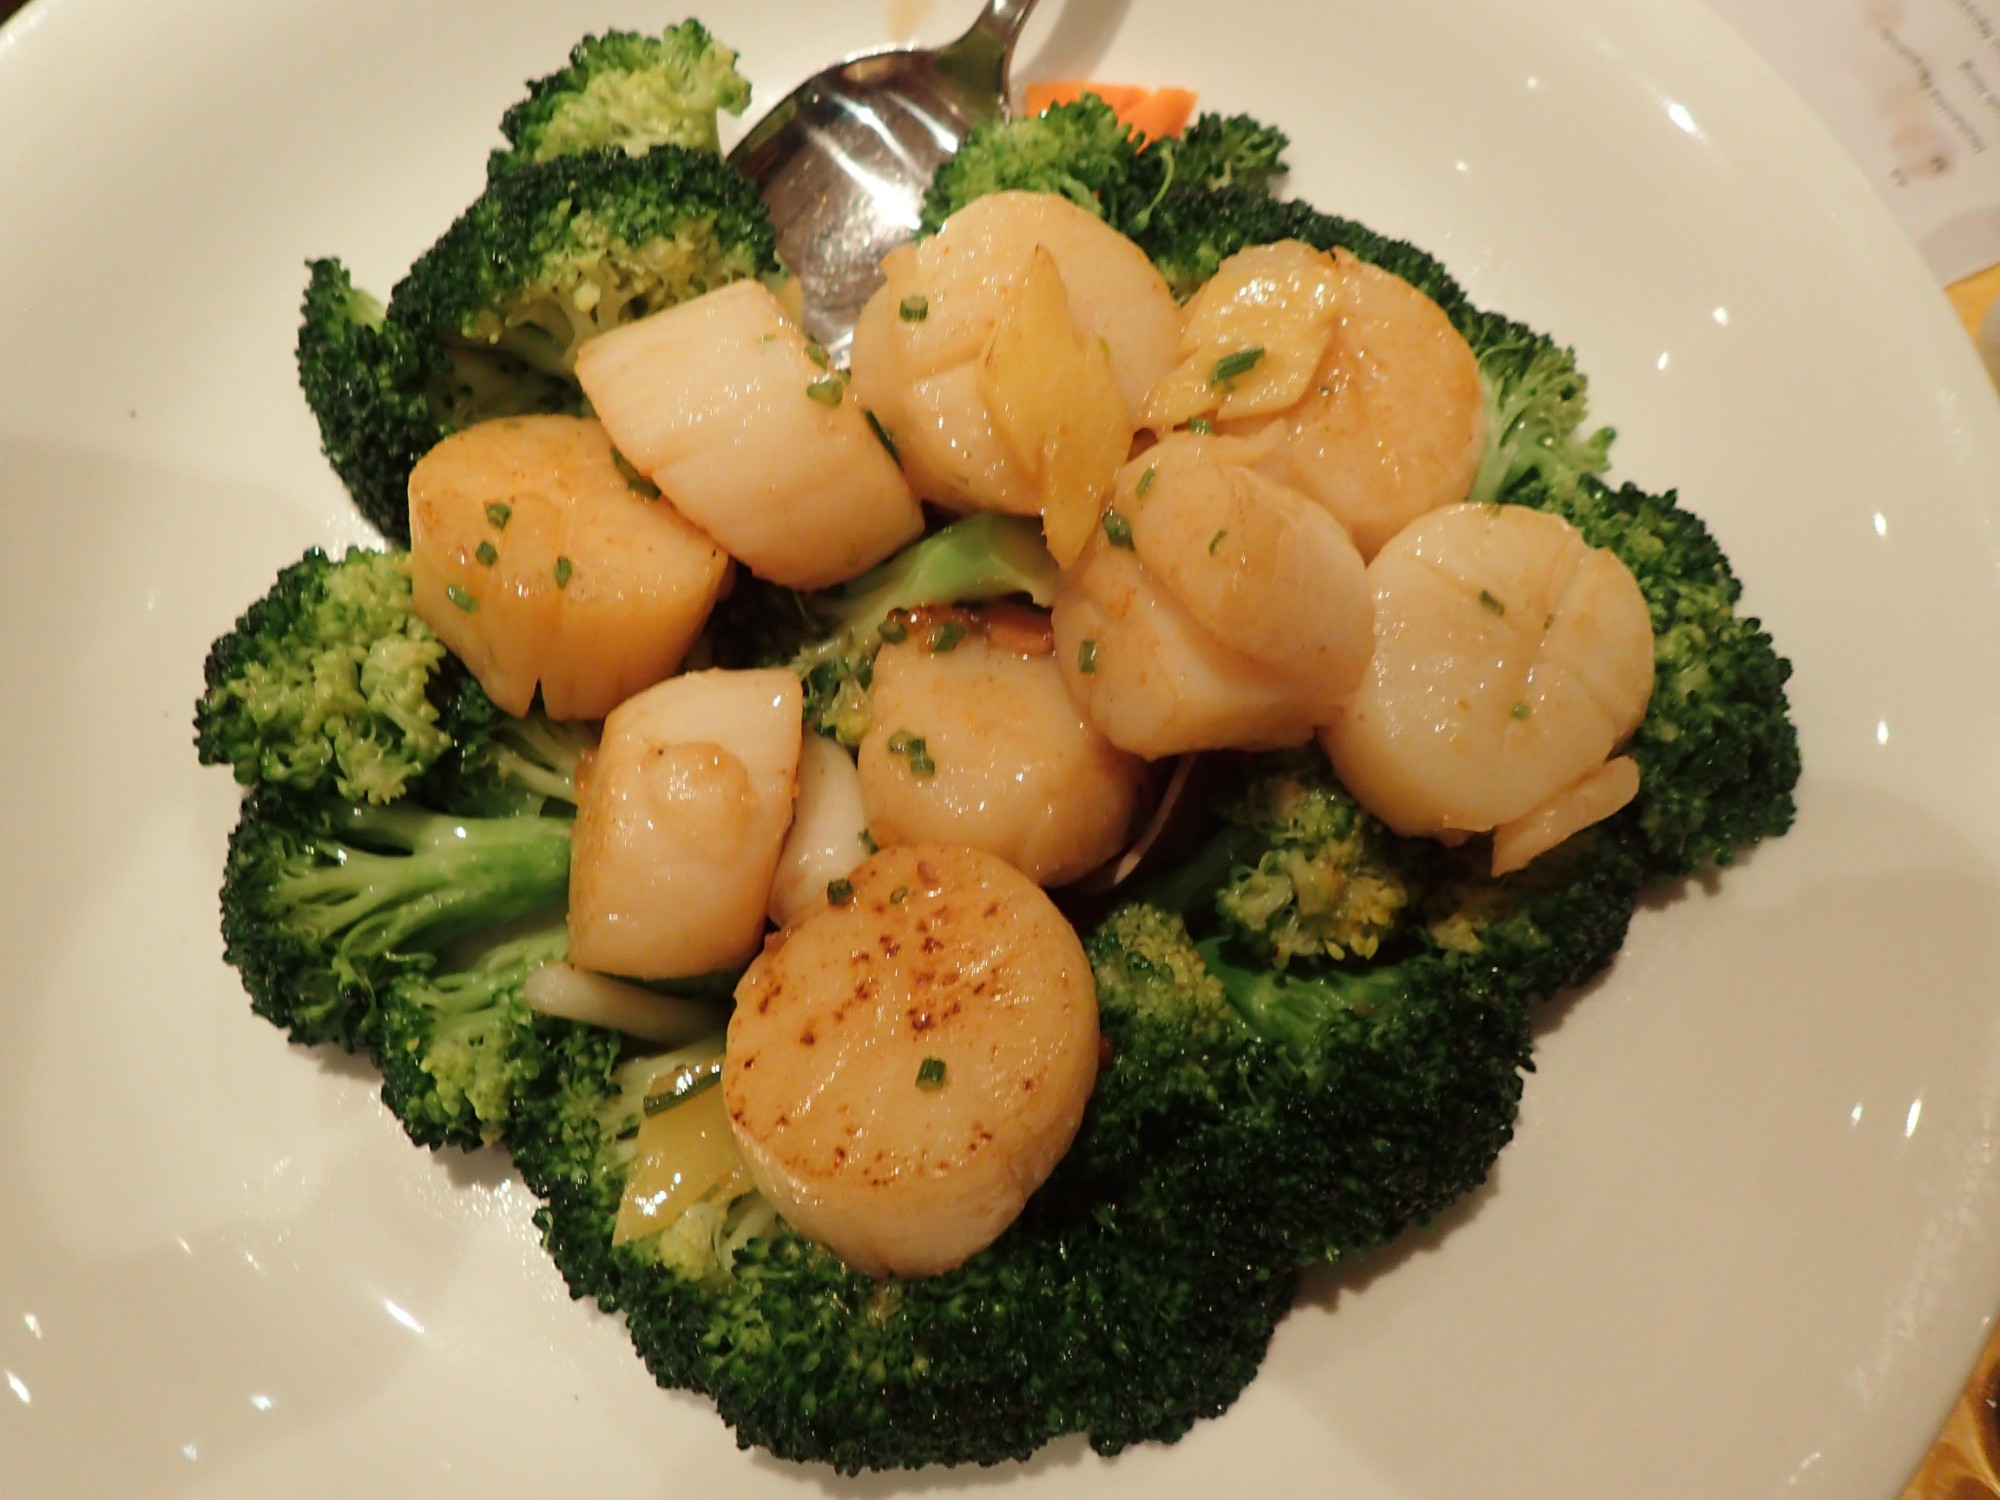 Stir-fried Coquilles St Jacques & Broccoli